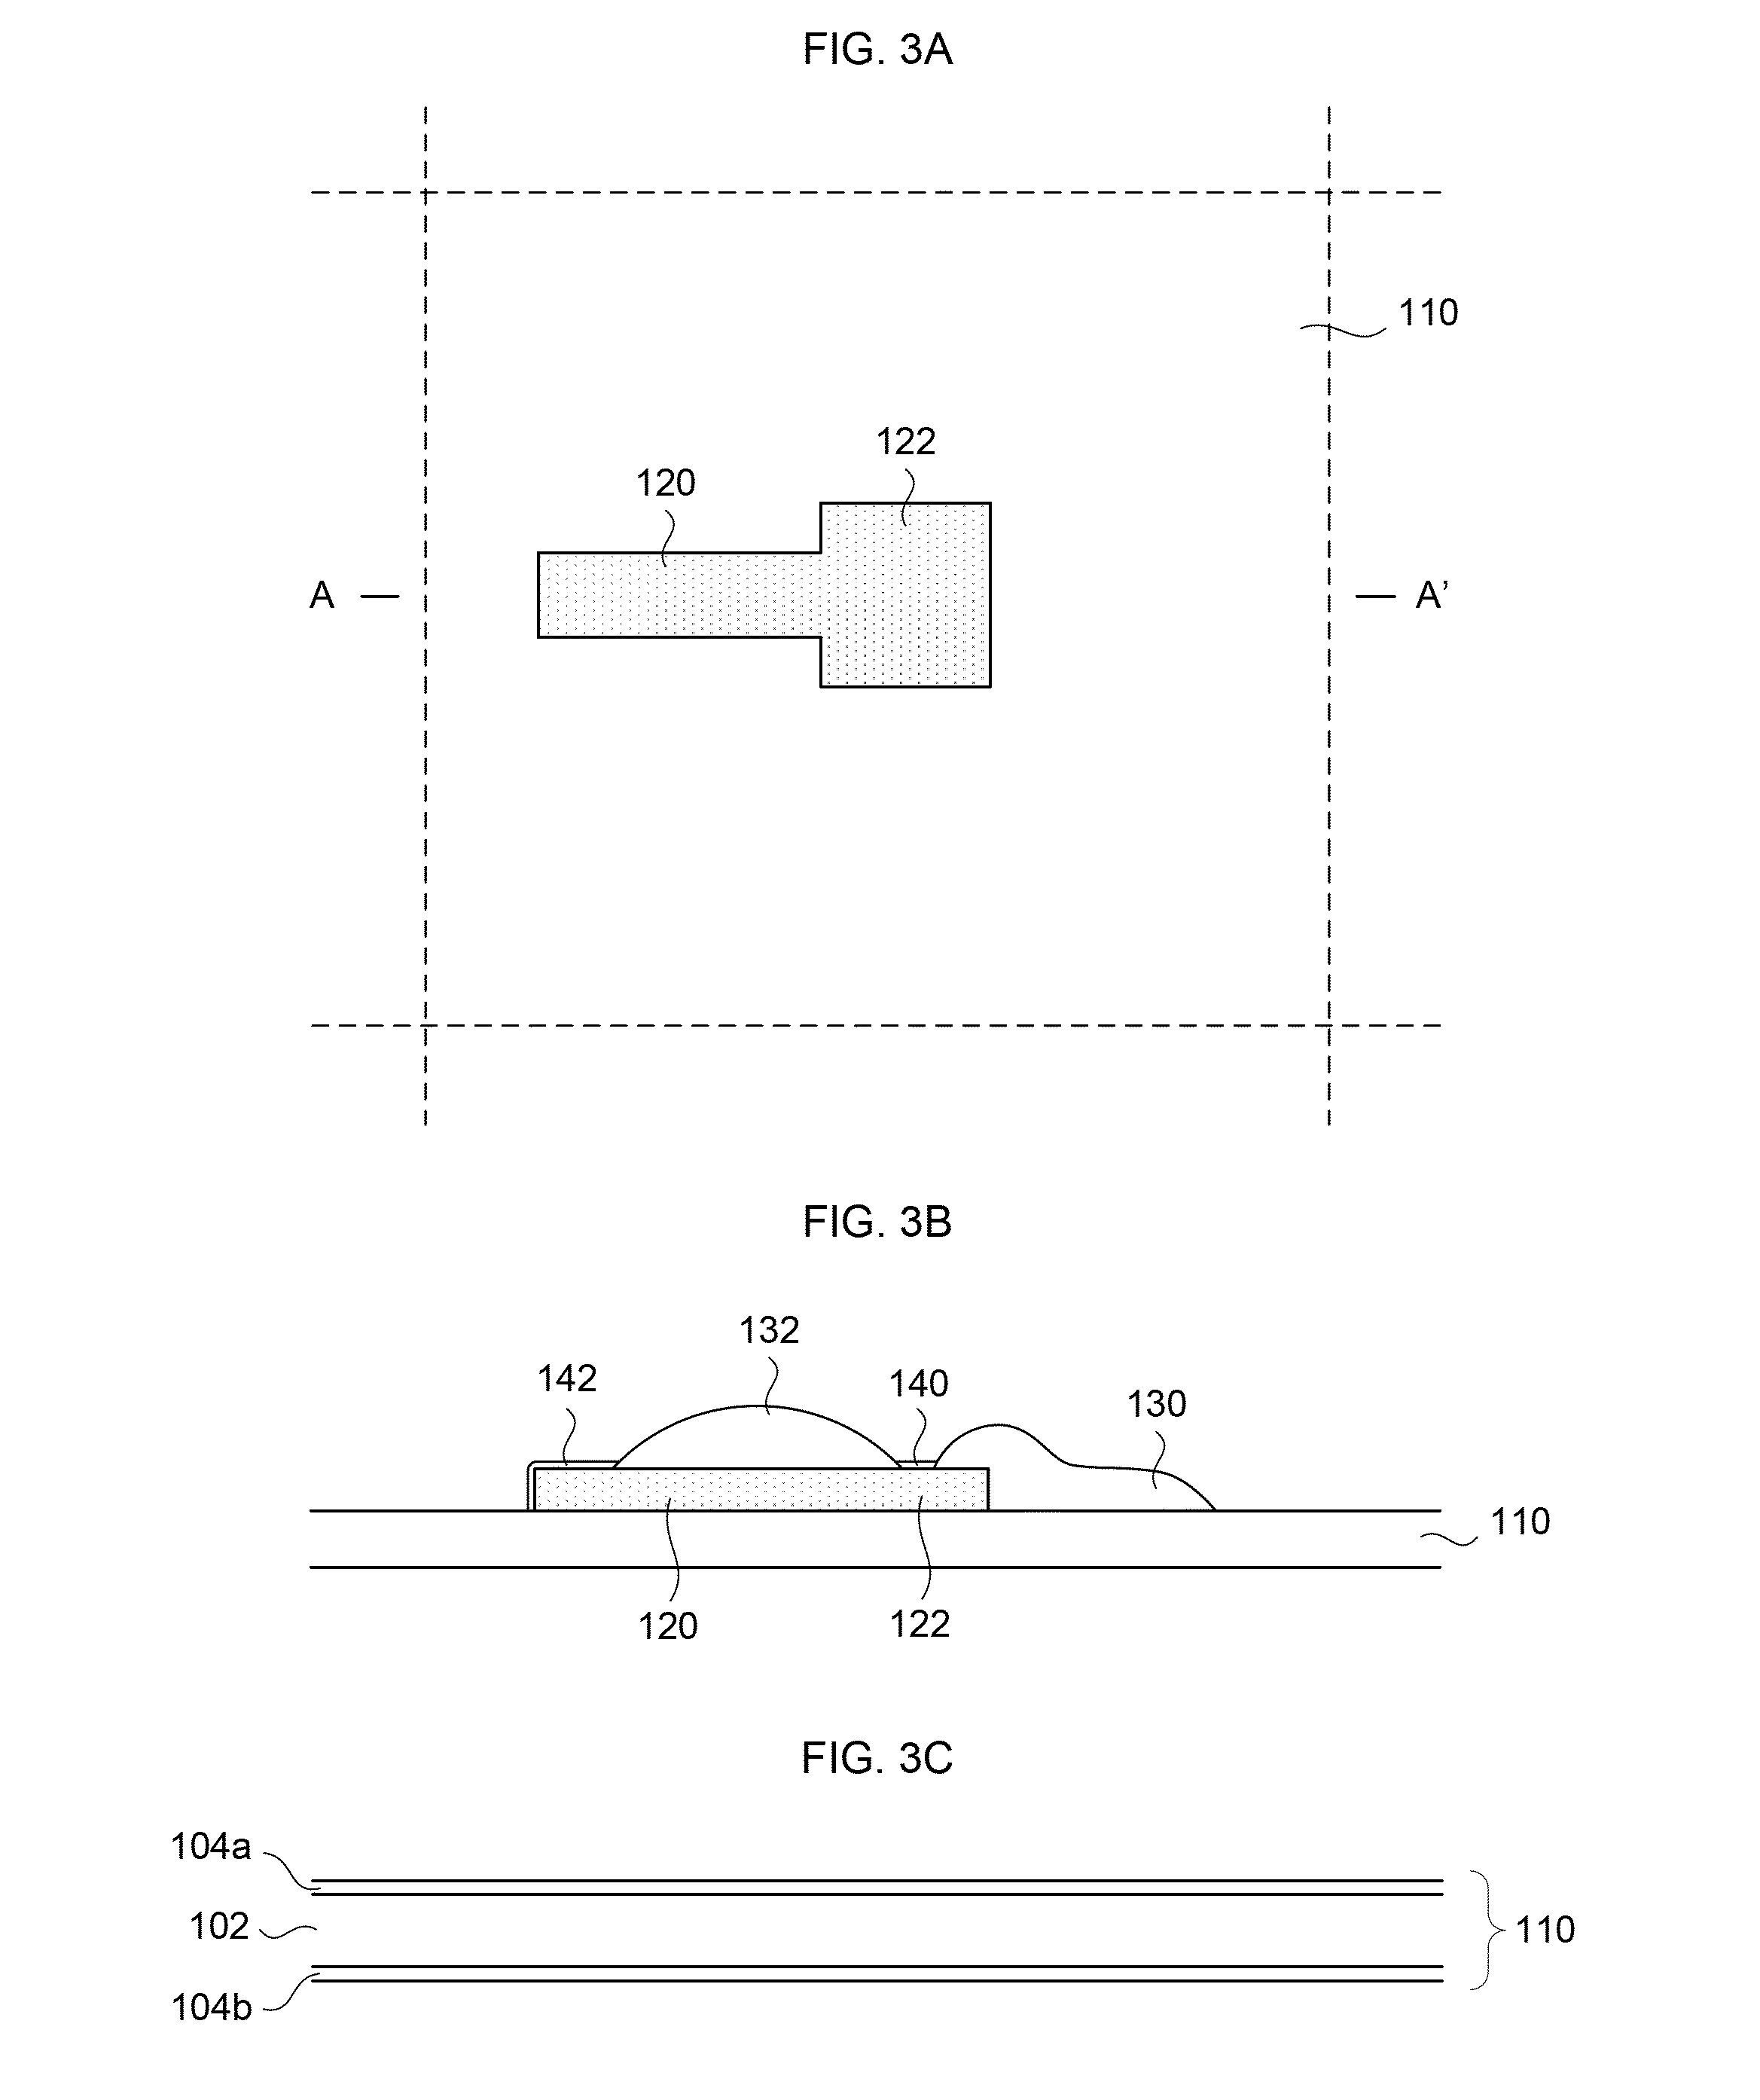 Method for making surveillance devices with multiple capacitors